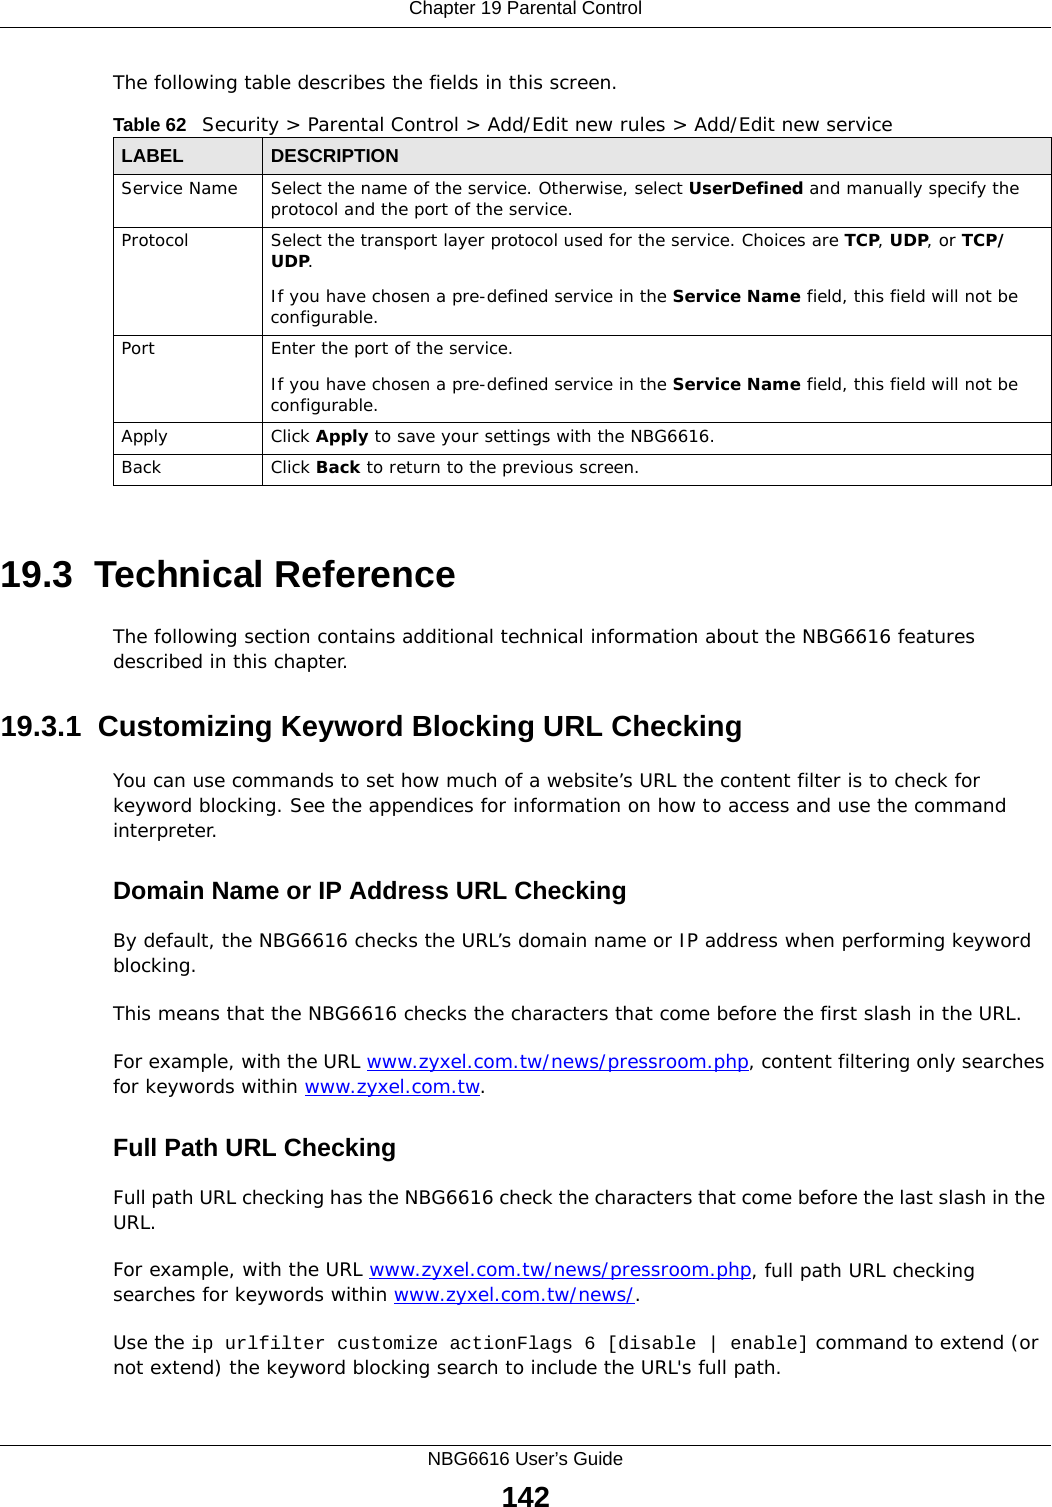 Chapter 19 Parental ControlNBG6616 User’s Guide142The following table describes the fields in this screen. 19.3  Technical ReferenceThe following section contains additional technical information about the NBG6616 features described in this chapter.19.3.1  Customizing Keyword Blocking URL CheckingYou can use commands to set how much of a website’s URL the content filter is to check for keyword blocking. See the appendices for information on how to access and use the command interpreter.Domain Name or IP Address URL CheckingBy default, the NBG6616 checks the URL’s domain name or IP address when performing keyword blocking.This means that the NBG6616 checks the characters that come before the first slash in the URL.For example, with the URL www.zyxel.com.tw/news/pressroom.php, content filtering only searches for keywords within www.zyxel.com.tw.Full Path URL CheckingFull path URL checking has the NBG6616 check the characters that come before the last slash in the URL.For example, with the URL www.zyxel.com.tw/news/pressroom.php, full path URL checking searches for keywords within www.zyxel.com.tw/news/.Use the ip urlfilter customize actionFlags 6 [disable | enable] command to extend (or not extend) the keyword blocking search to include the URL&apos;s full path.Table 62   Security &gt; Parental Control &gt; Add/Edit new rules &gt; Add/Edit new serviceLABEL DESCRIPTIONService Name Select the name of the service. Otherwise, select UserDefined and manually specify the protocol and the port of the service.Protocol Select the transport layer protocol used for the service. Choices are TCP, UDP, or TCP/UDP. If you have chosen a pre-defined service in the Service Name field, this field will not be configurable.Port Enter the port of the service. If you have chosen a pre-defined service in the Service Name field, this field will not be configurable.Apply Click Apply to save your settings with the NBG6616.Back Click Back to return to the previous screen.